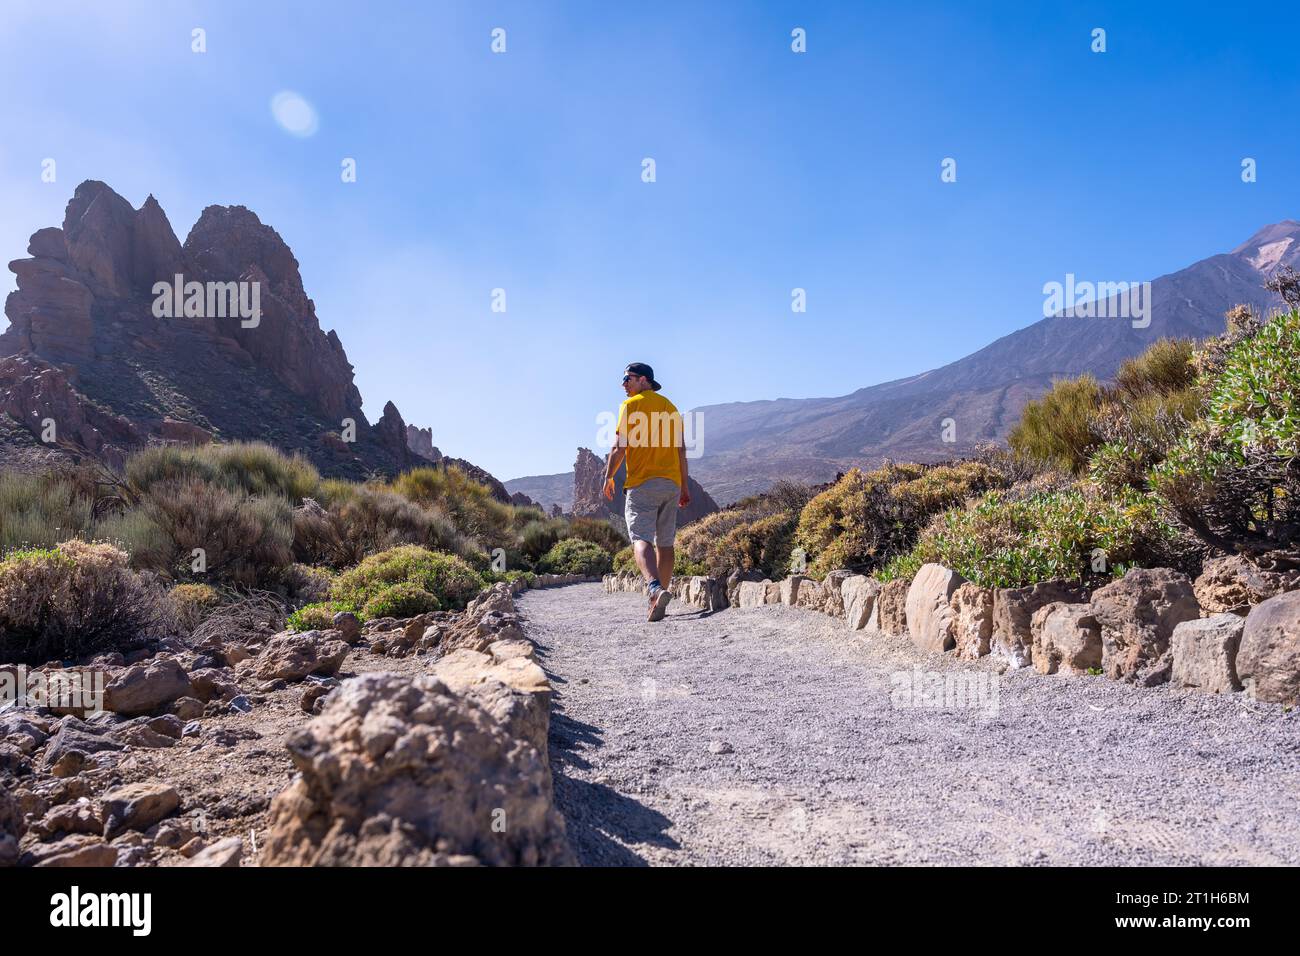 A tourist walking on the path between Roques de Gracia and Roque Cinchado in the natural area of Teide in Tenerife, Canary Islands Stock Photo